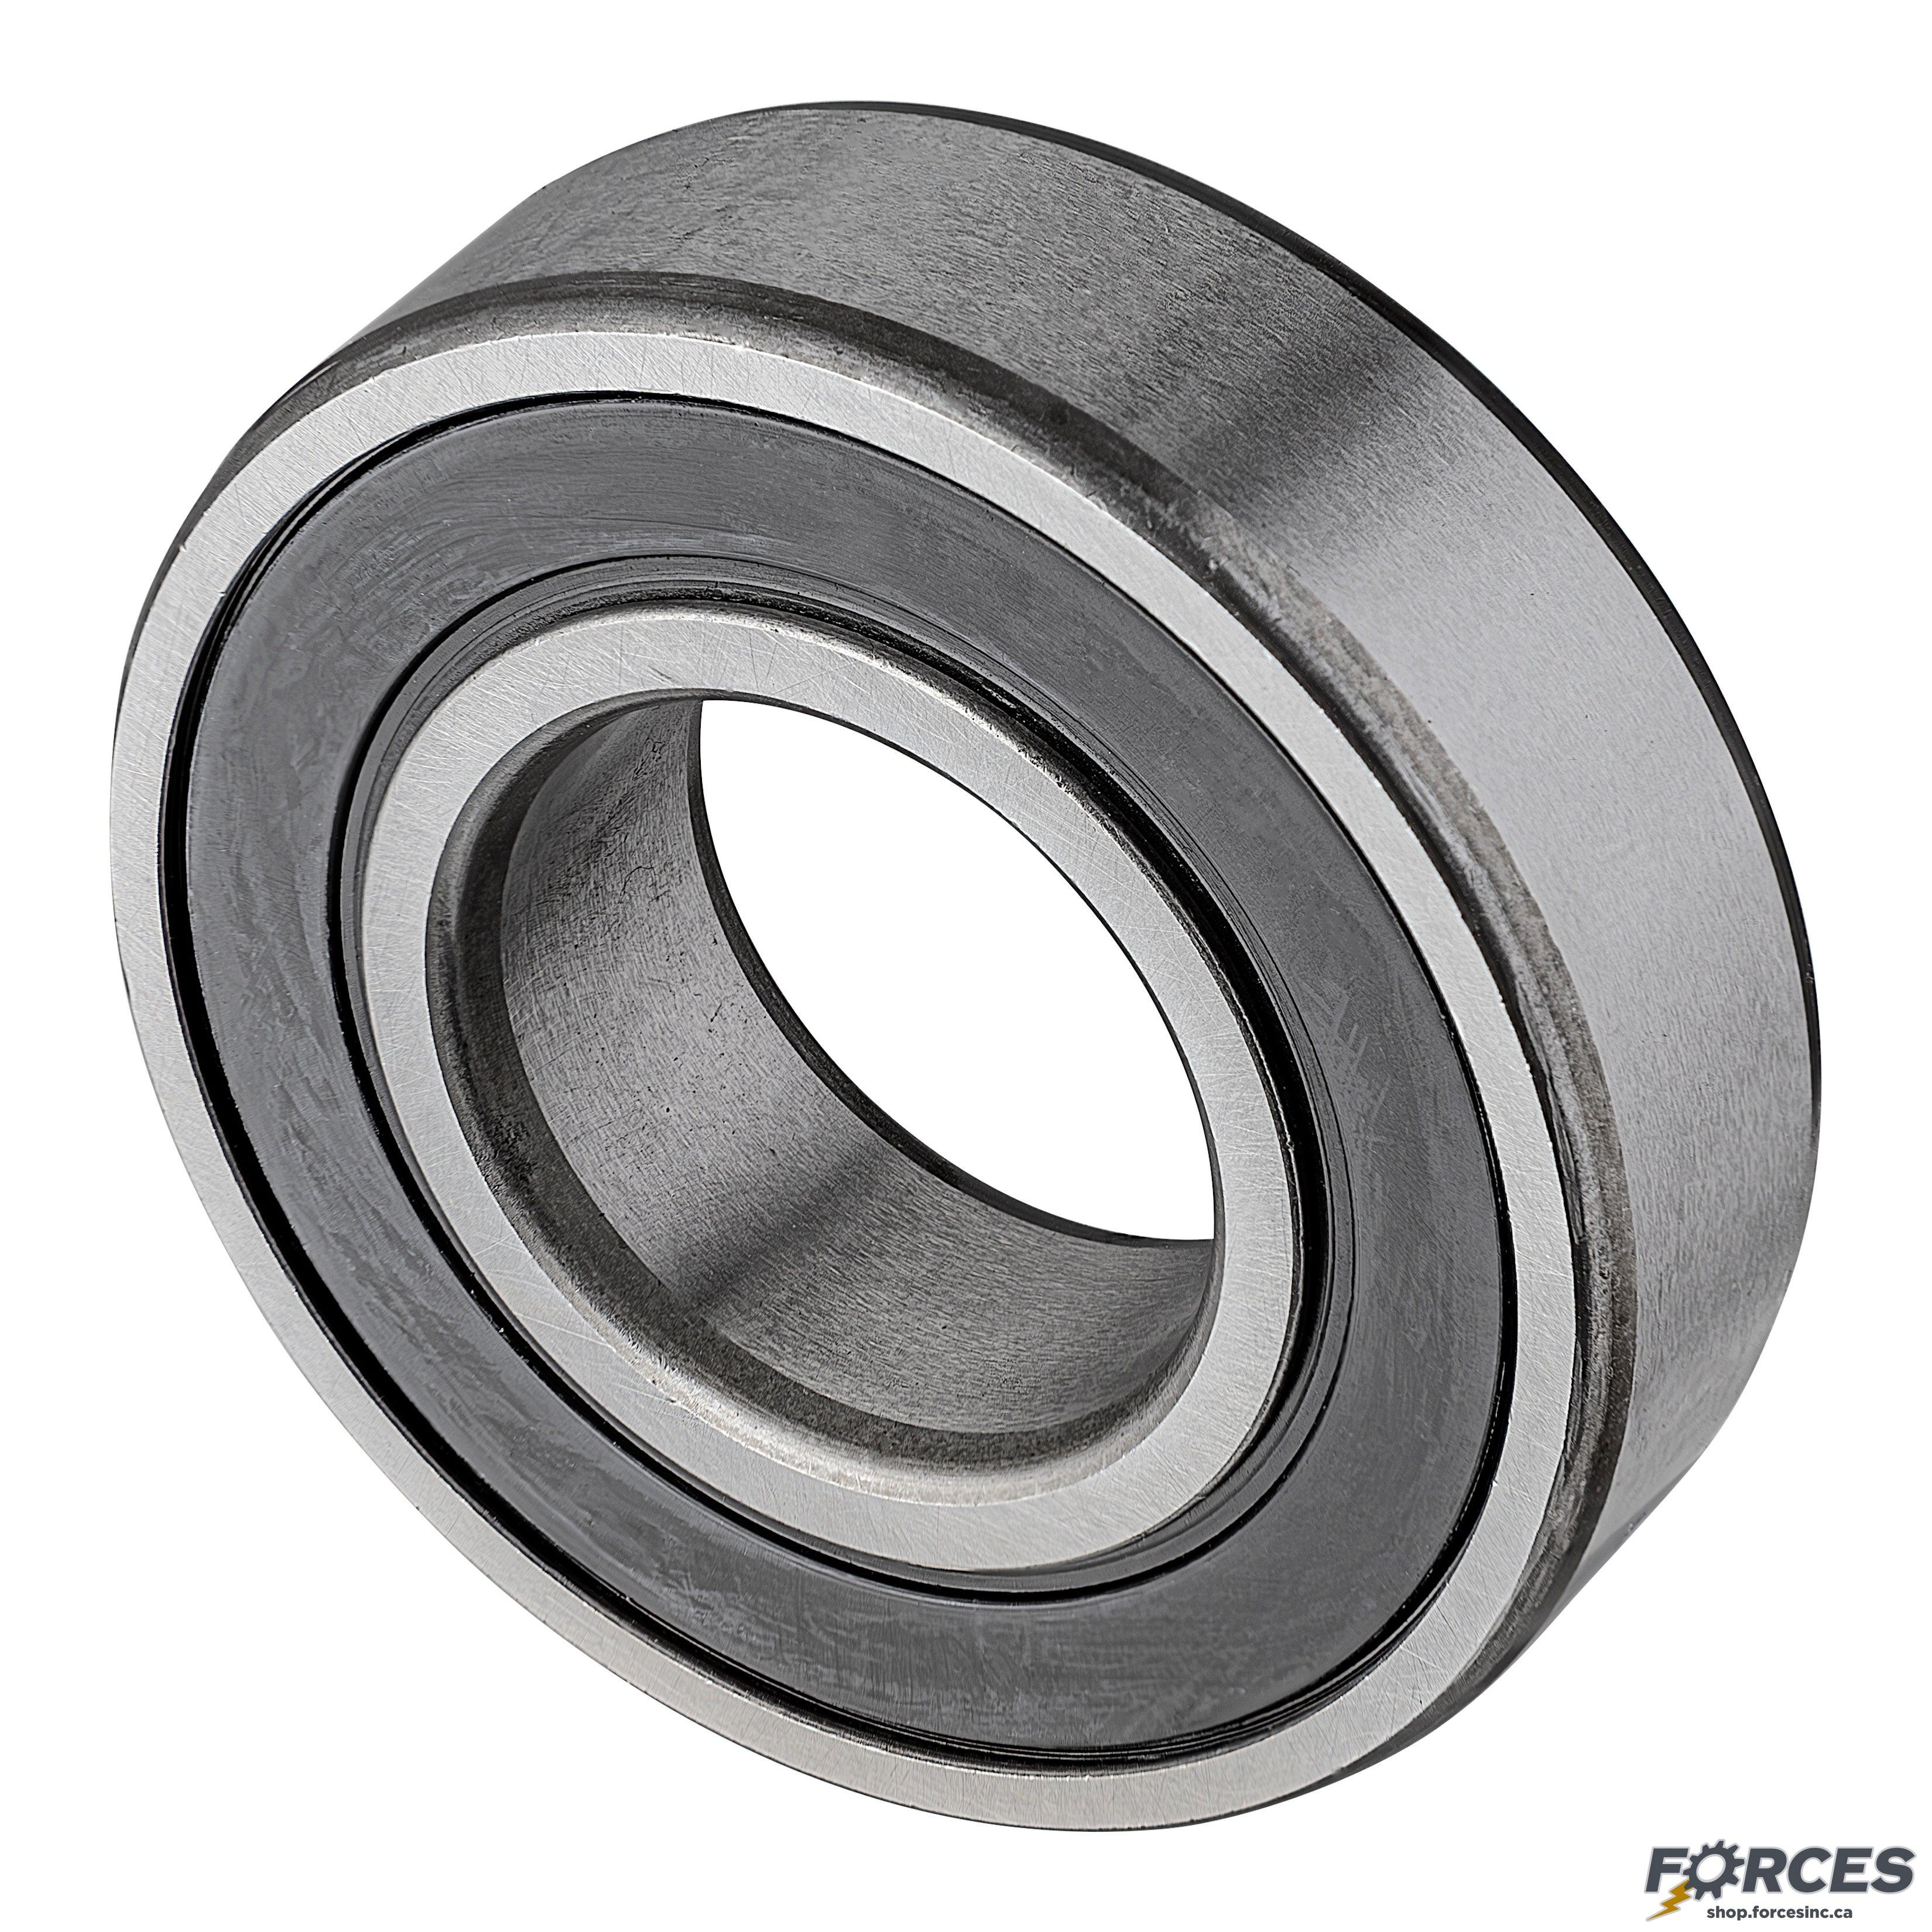 6208-2RS | Ball Bearings Metric 40mmx80mmx18mm Seal 2RS - Forces Inc